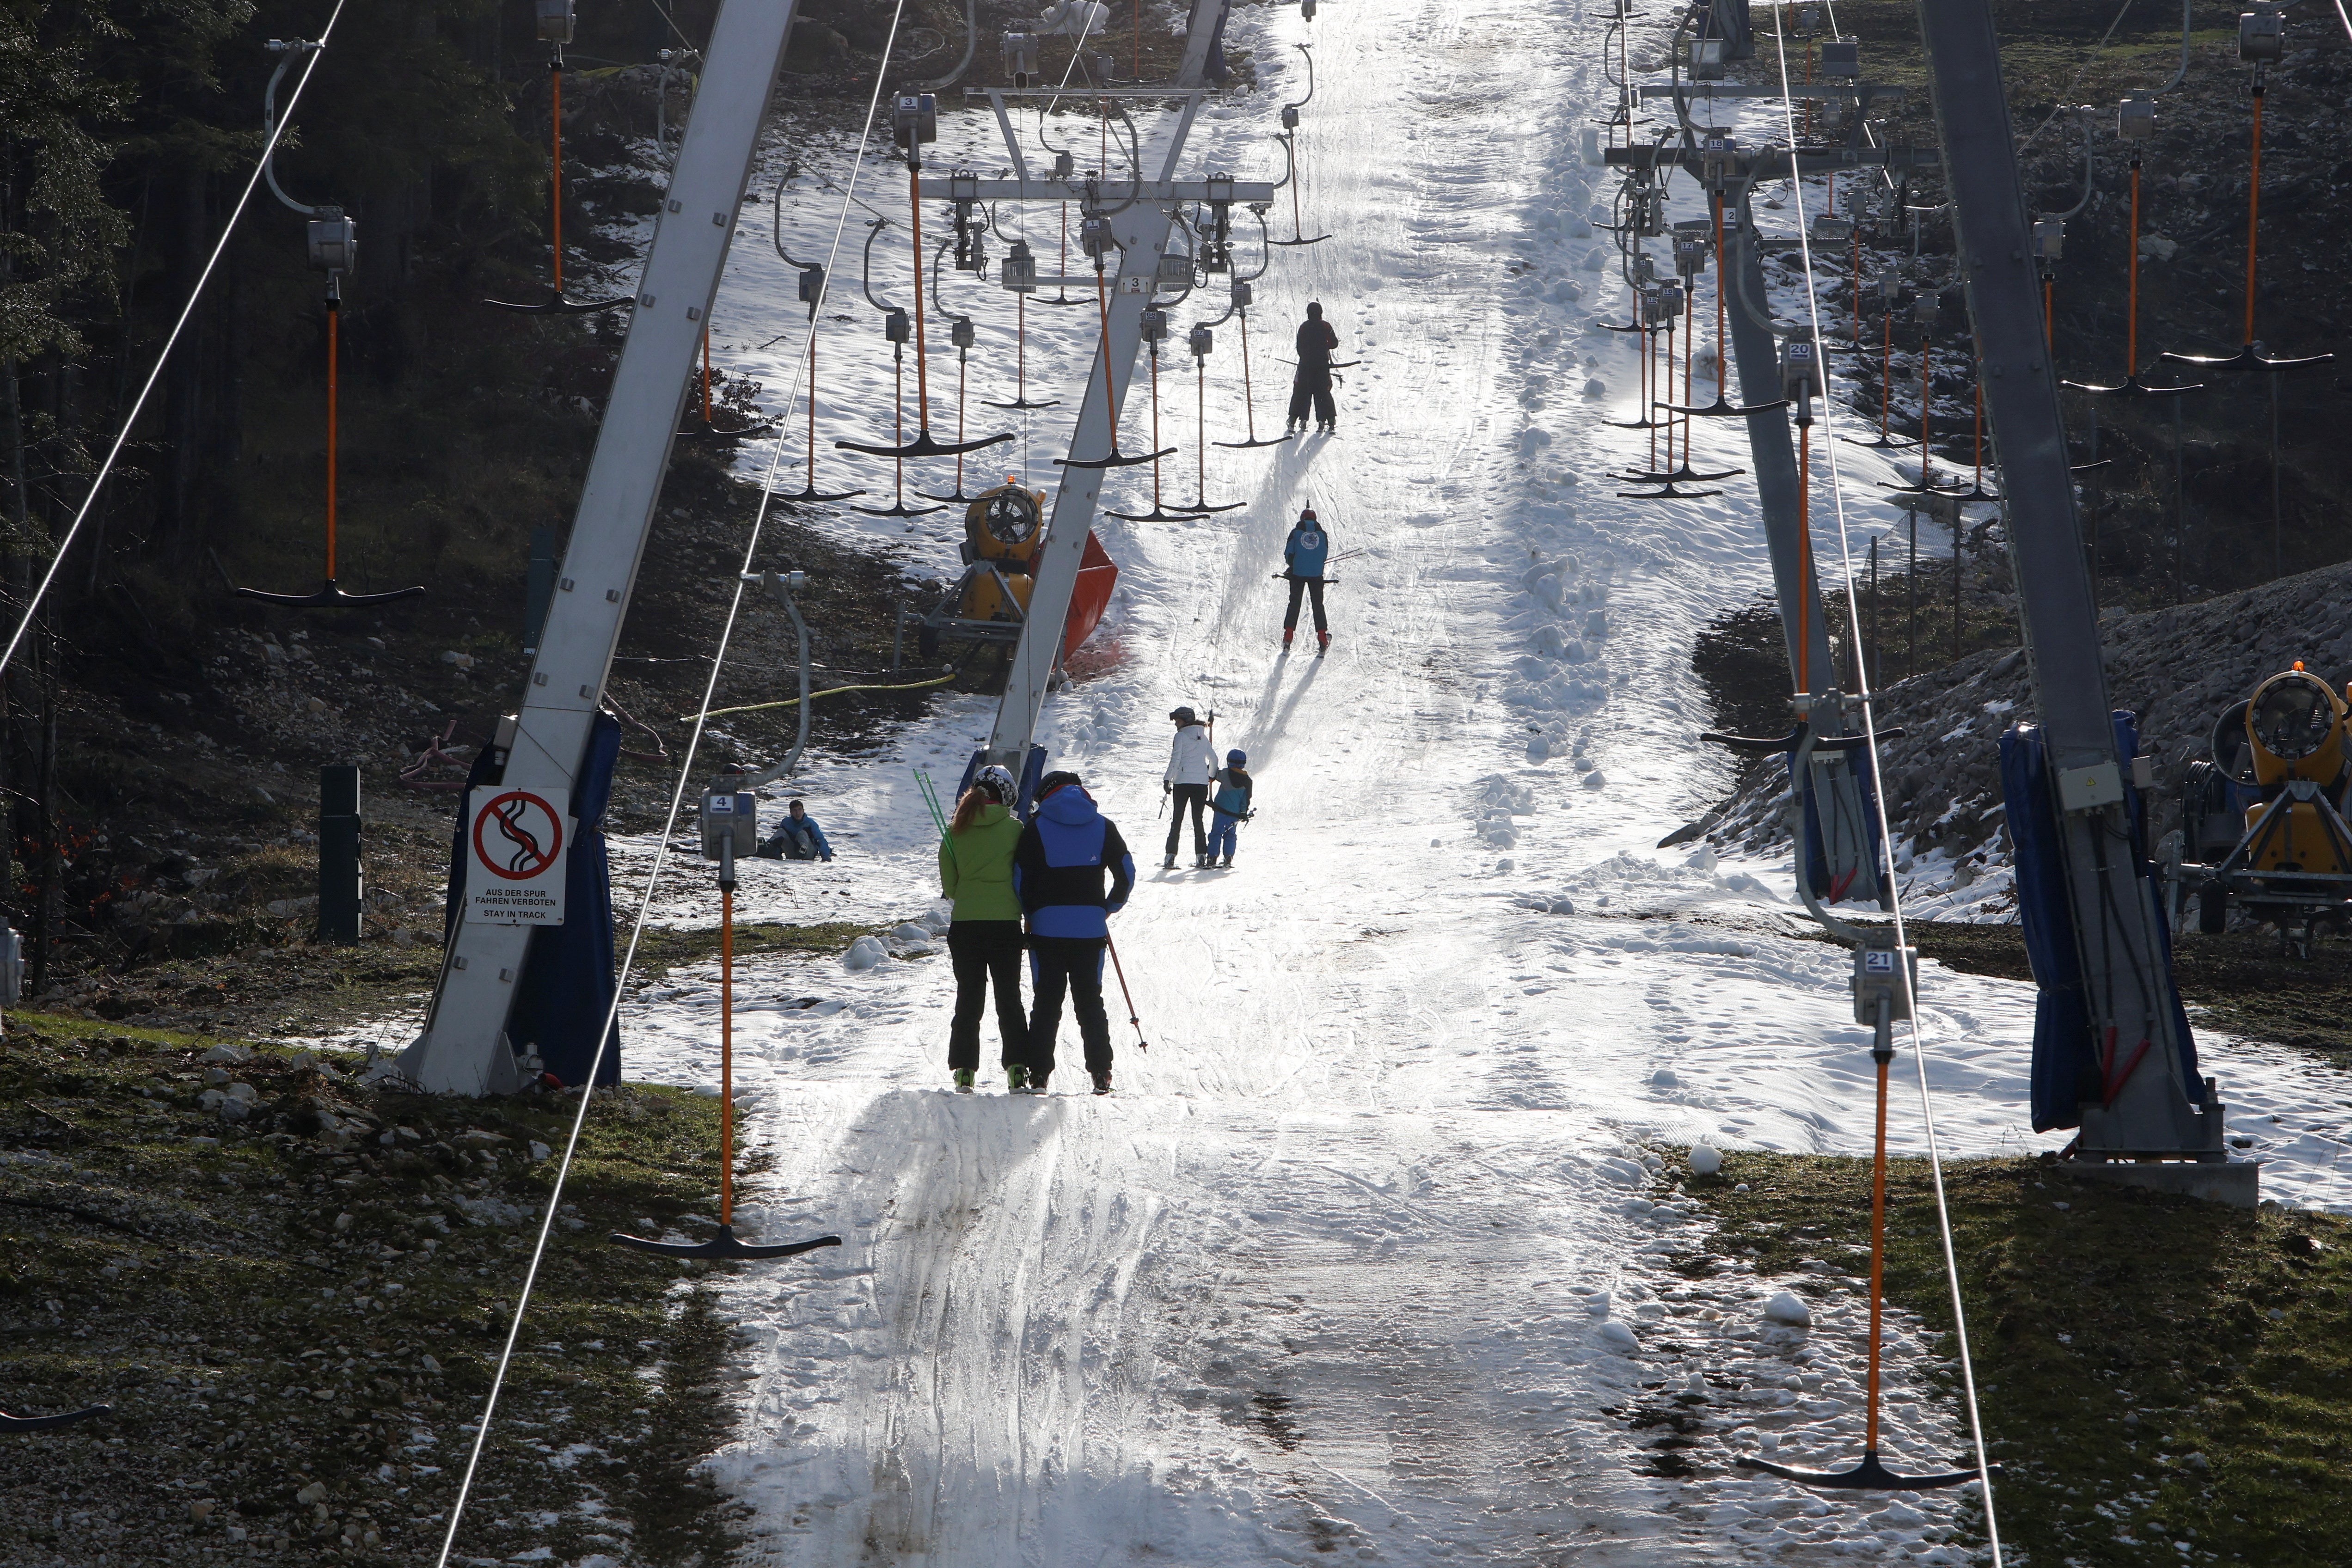 Visitors ride the ski lift during unseasonably warm weather on Mount Bjelasnica